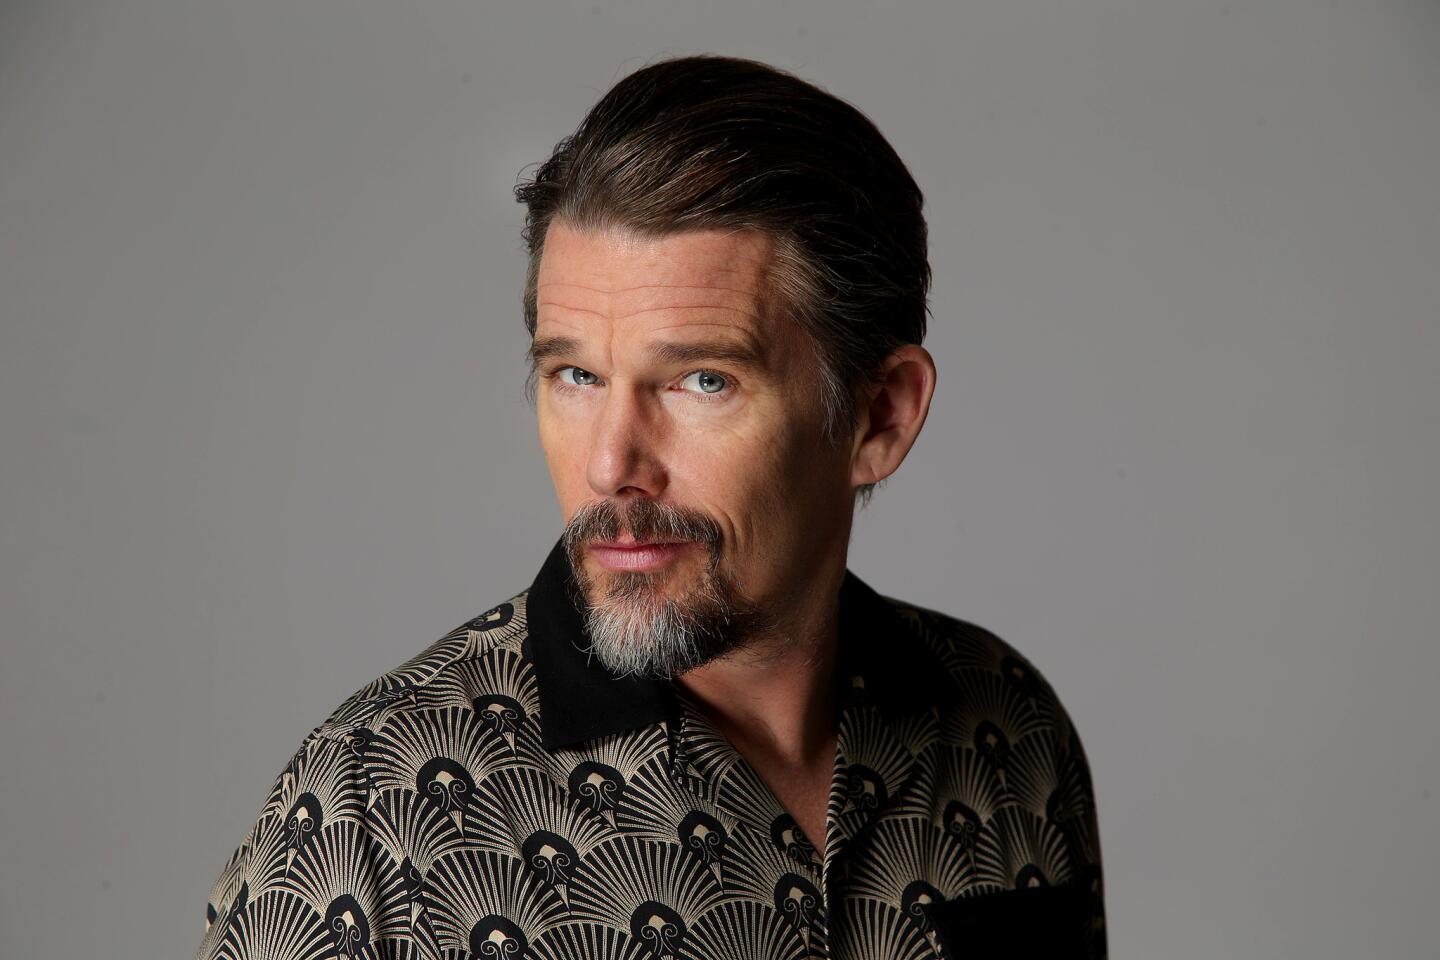 Ethan Hawke -- actor in "First Reformed" and "Juliet, Naked" and director of "Blaze" -- attends the Envelope gathering of lead actors for a frank discussion on the industry and their movies.